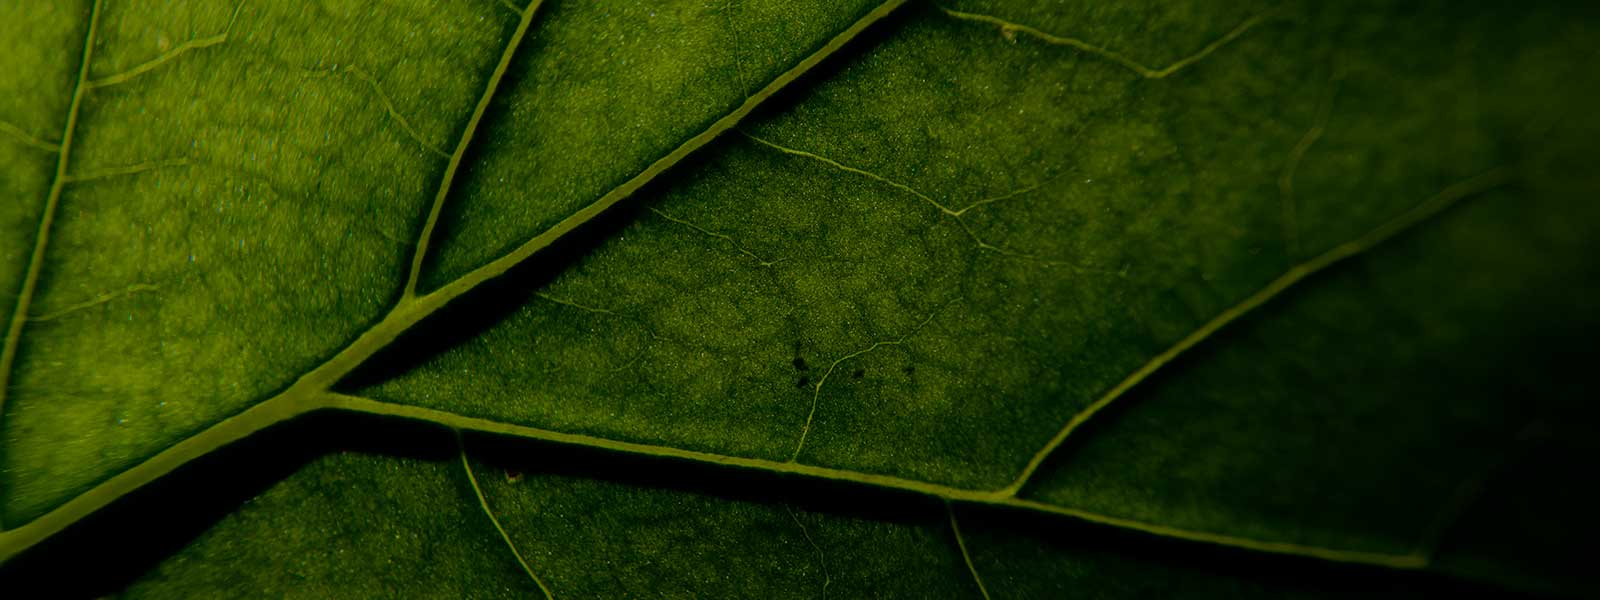 A leaf zoomed in